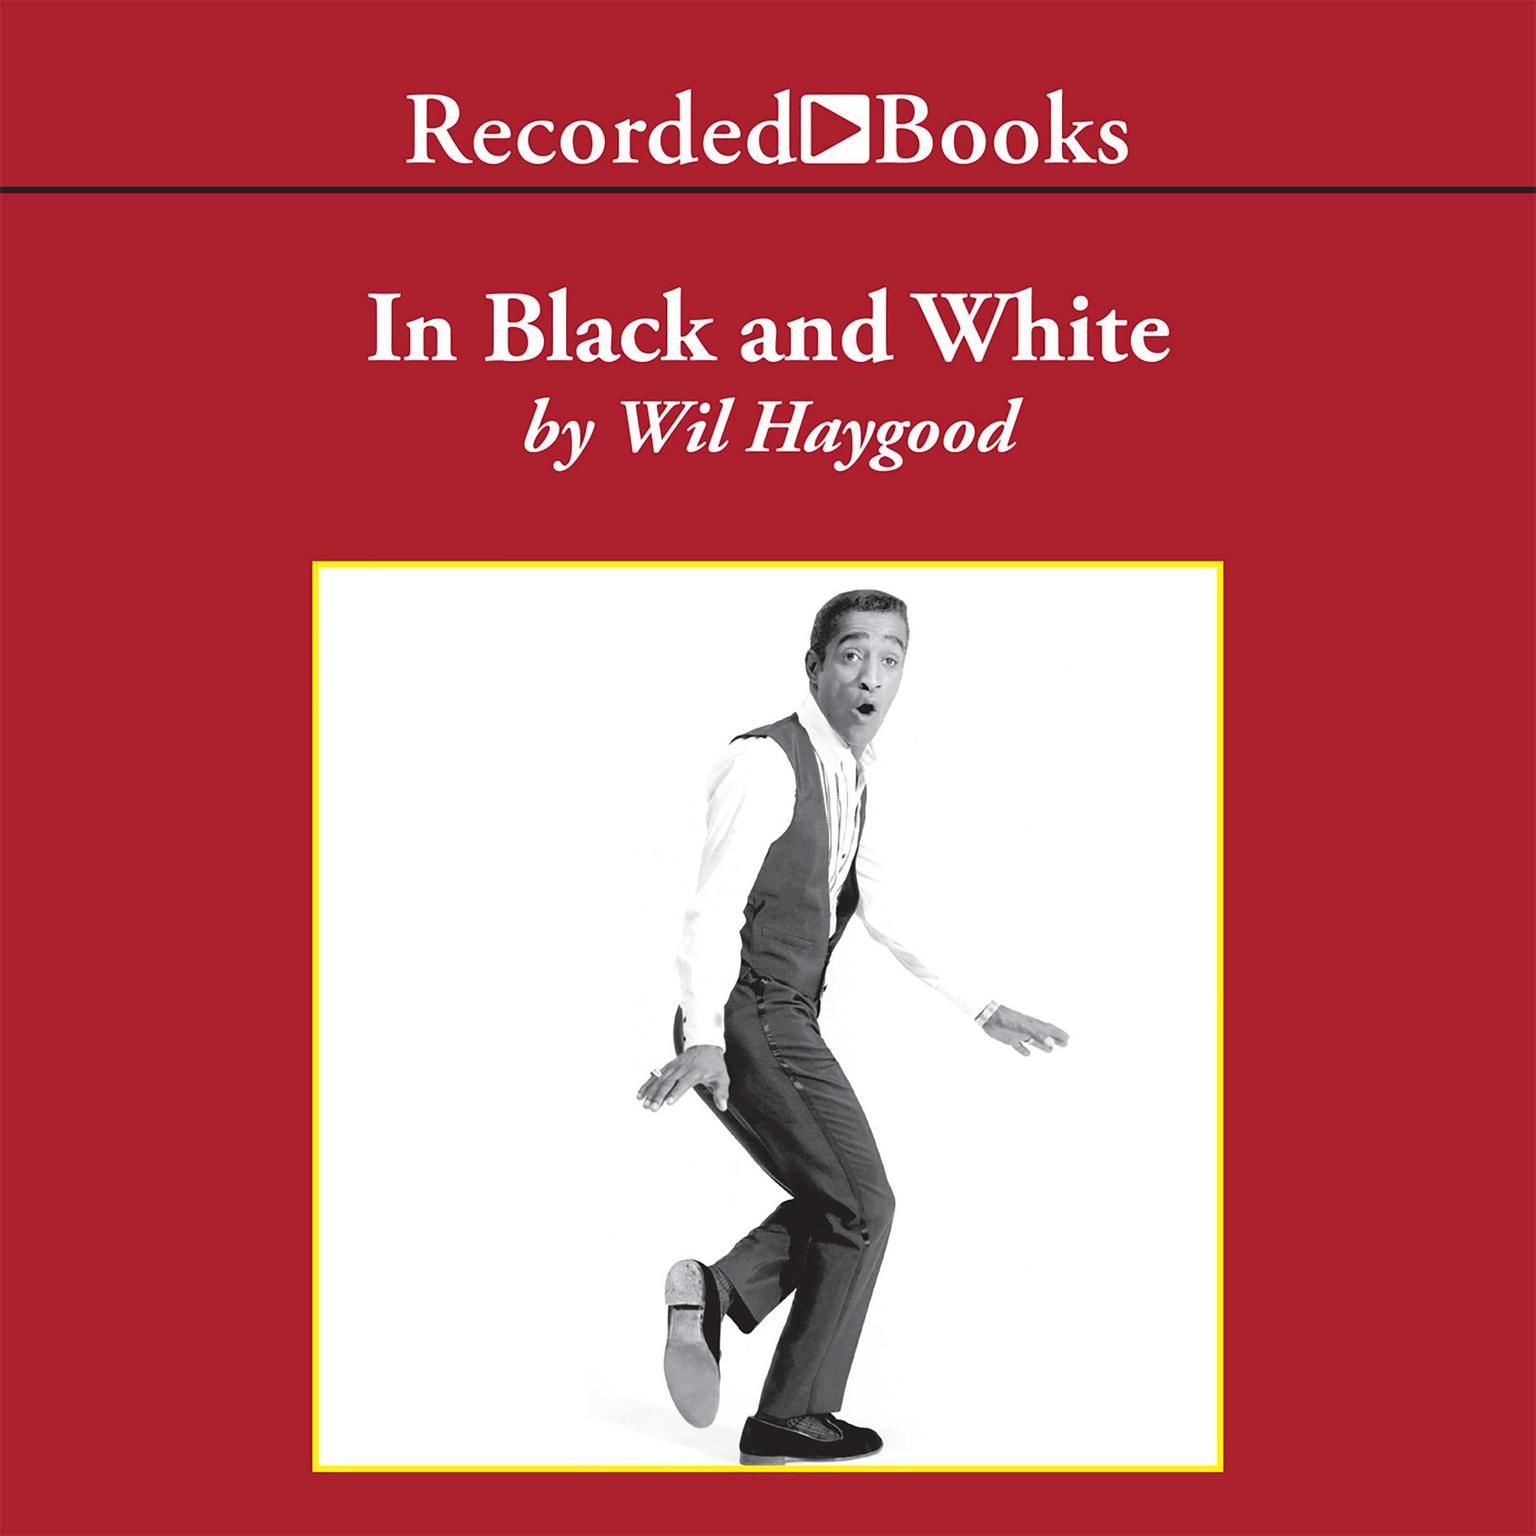 In Black and White: The Life of Sammy Davis Junior Audiobook, by Wil Haygood